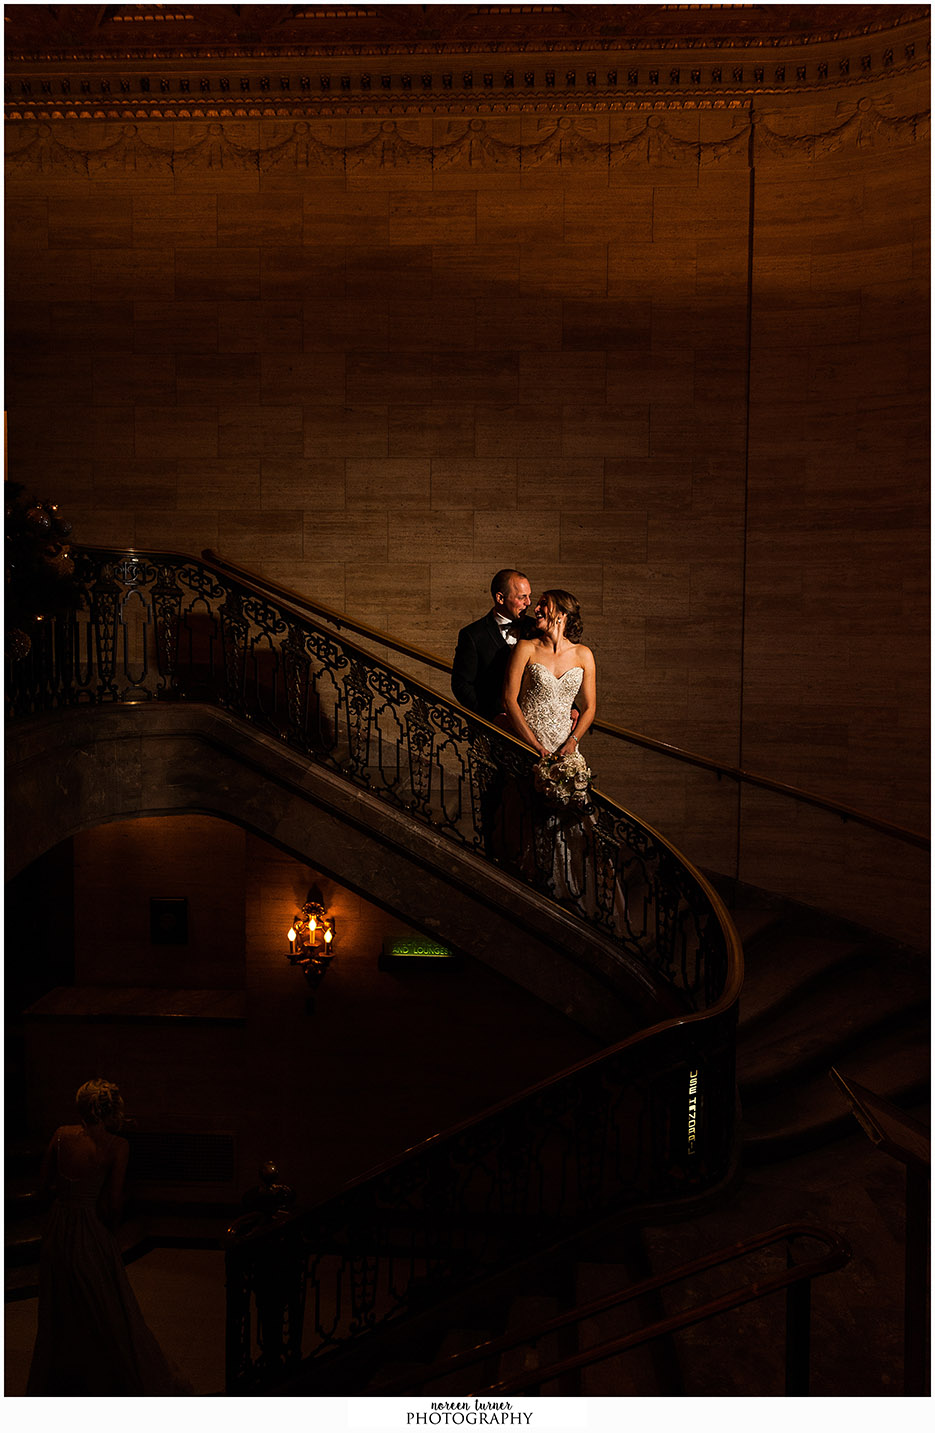 A stunning and elegant Hotel DuPont wedding with a gold and Christmas theme